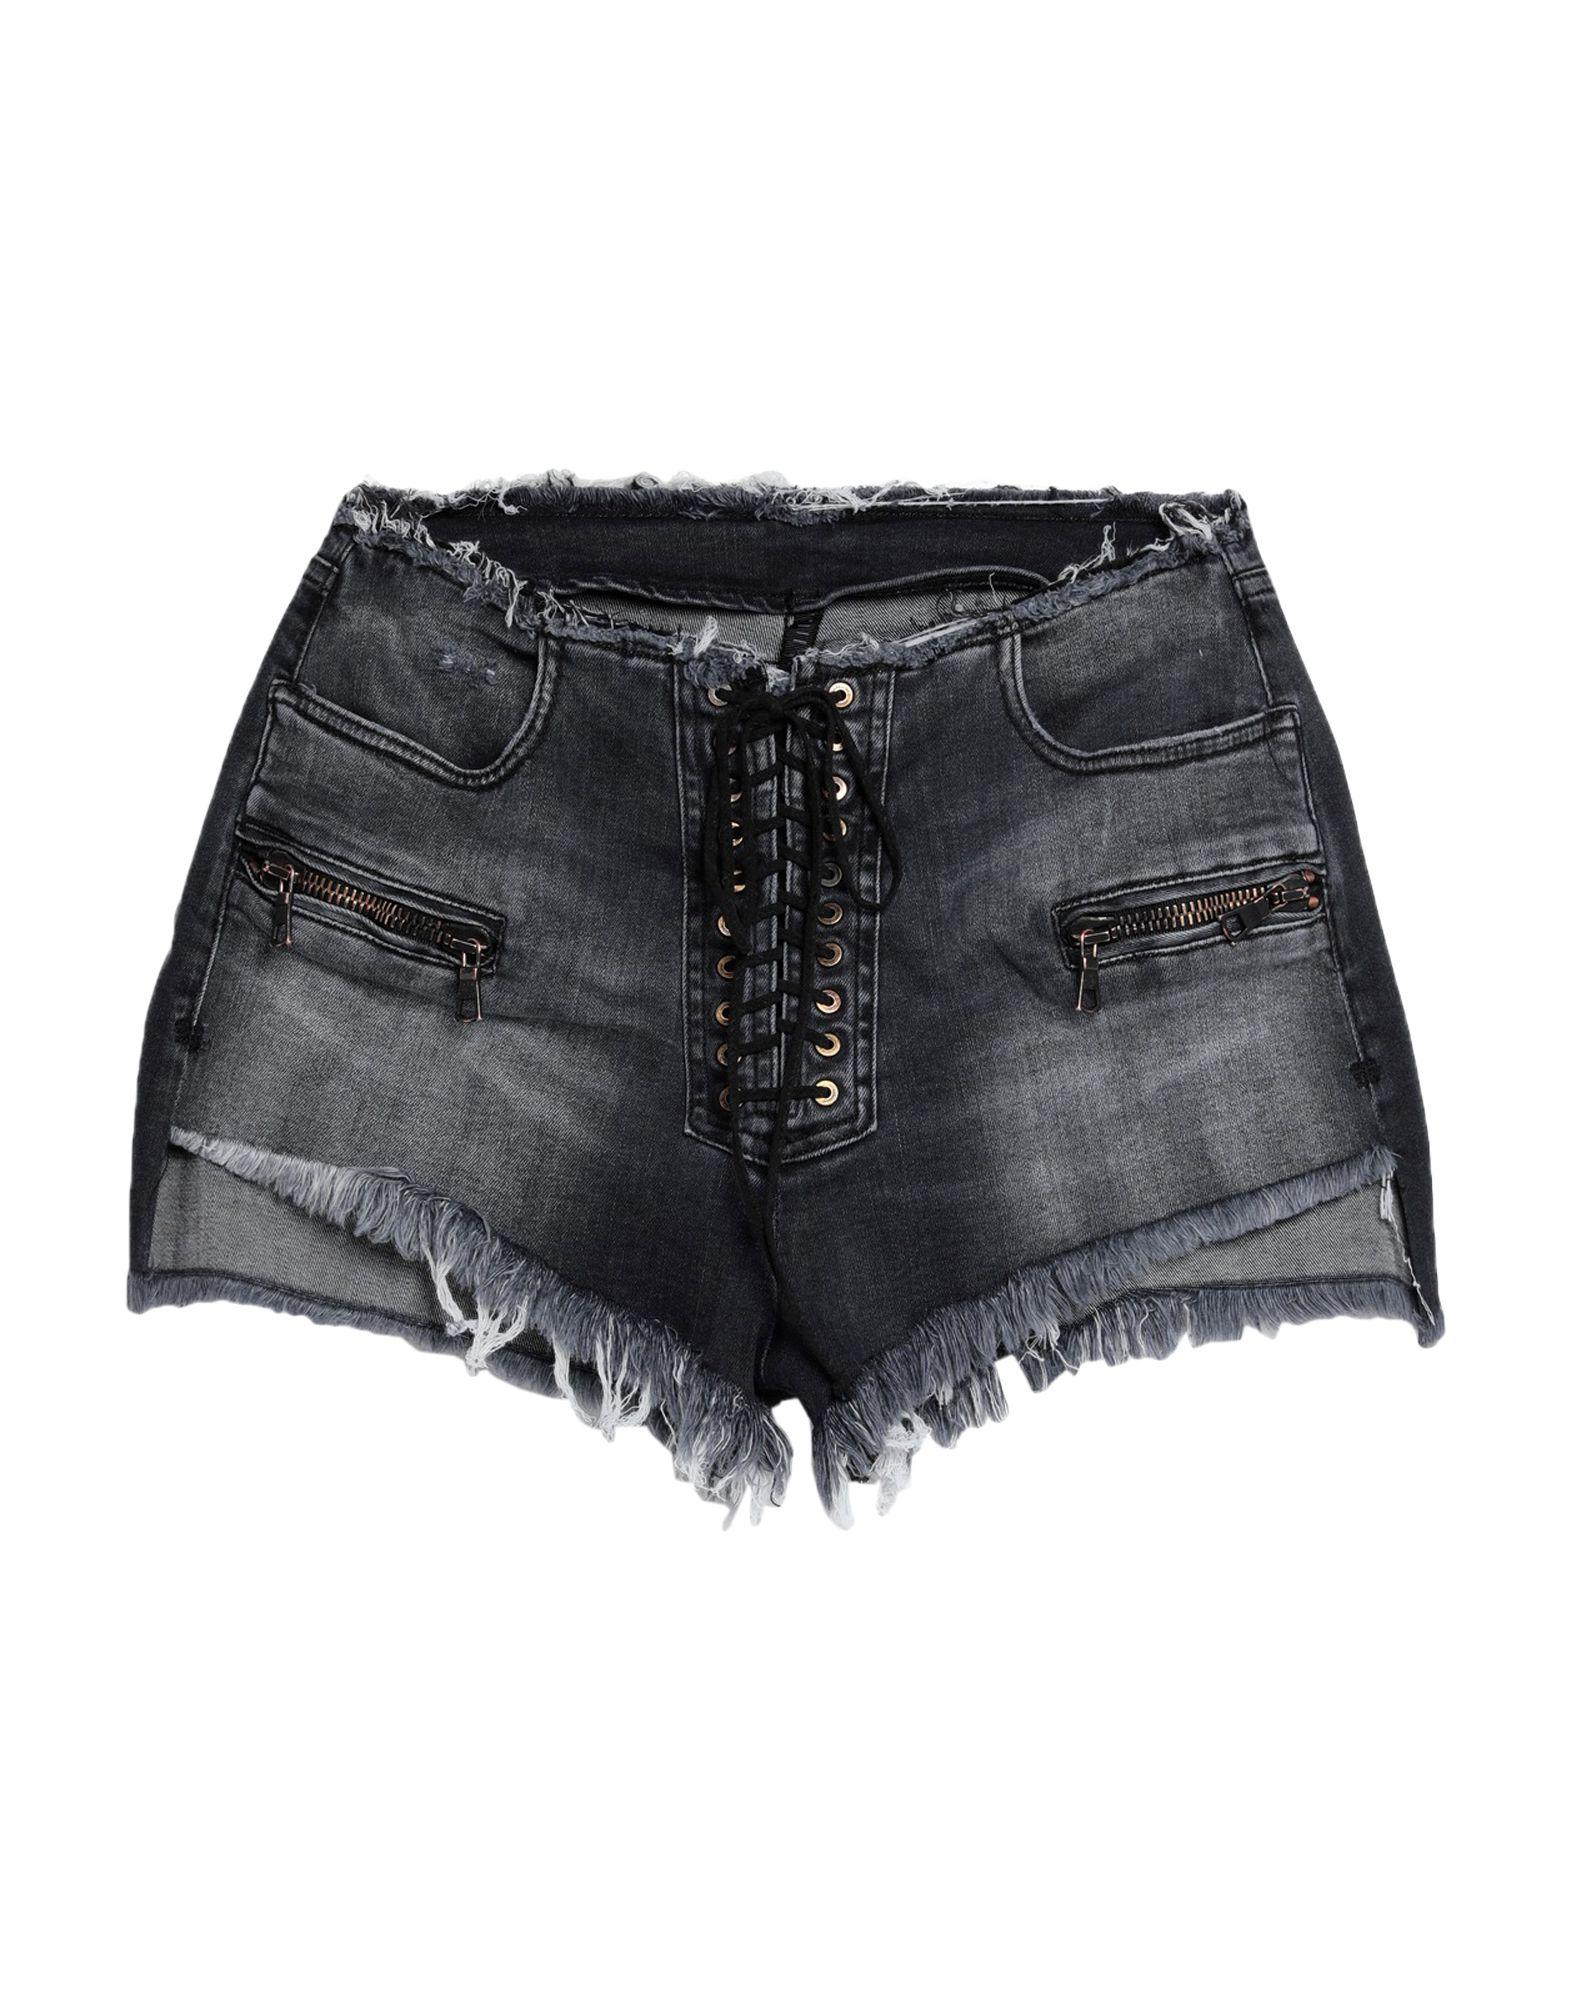 Unravel Project Denim Shorts in Black - Lyst